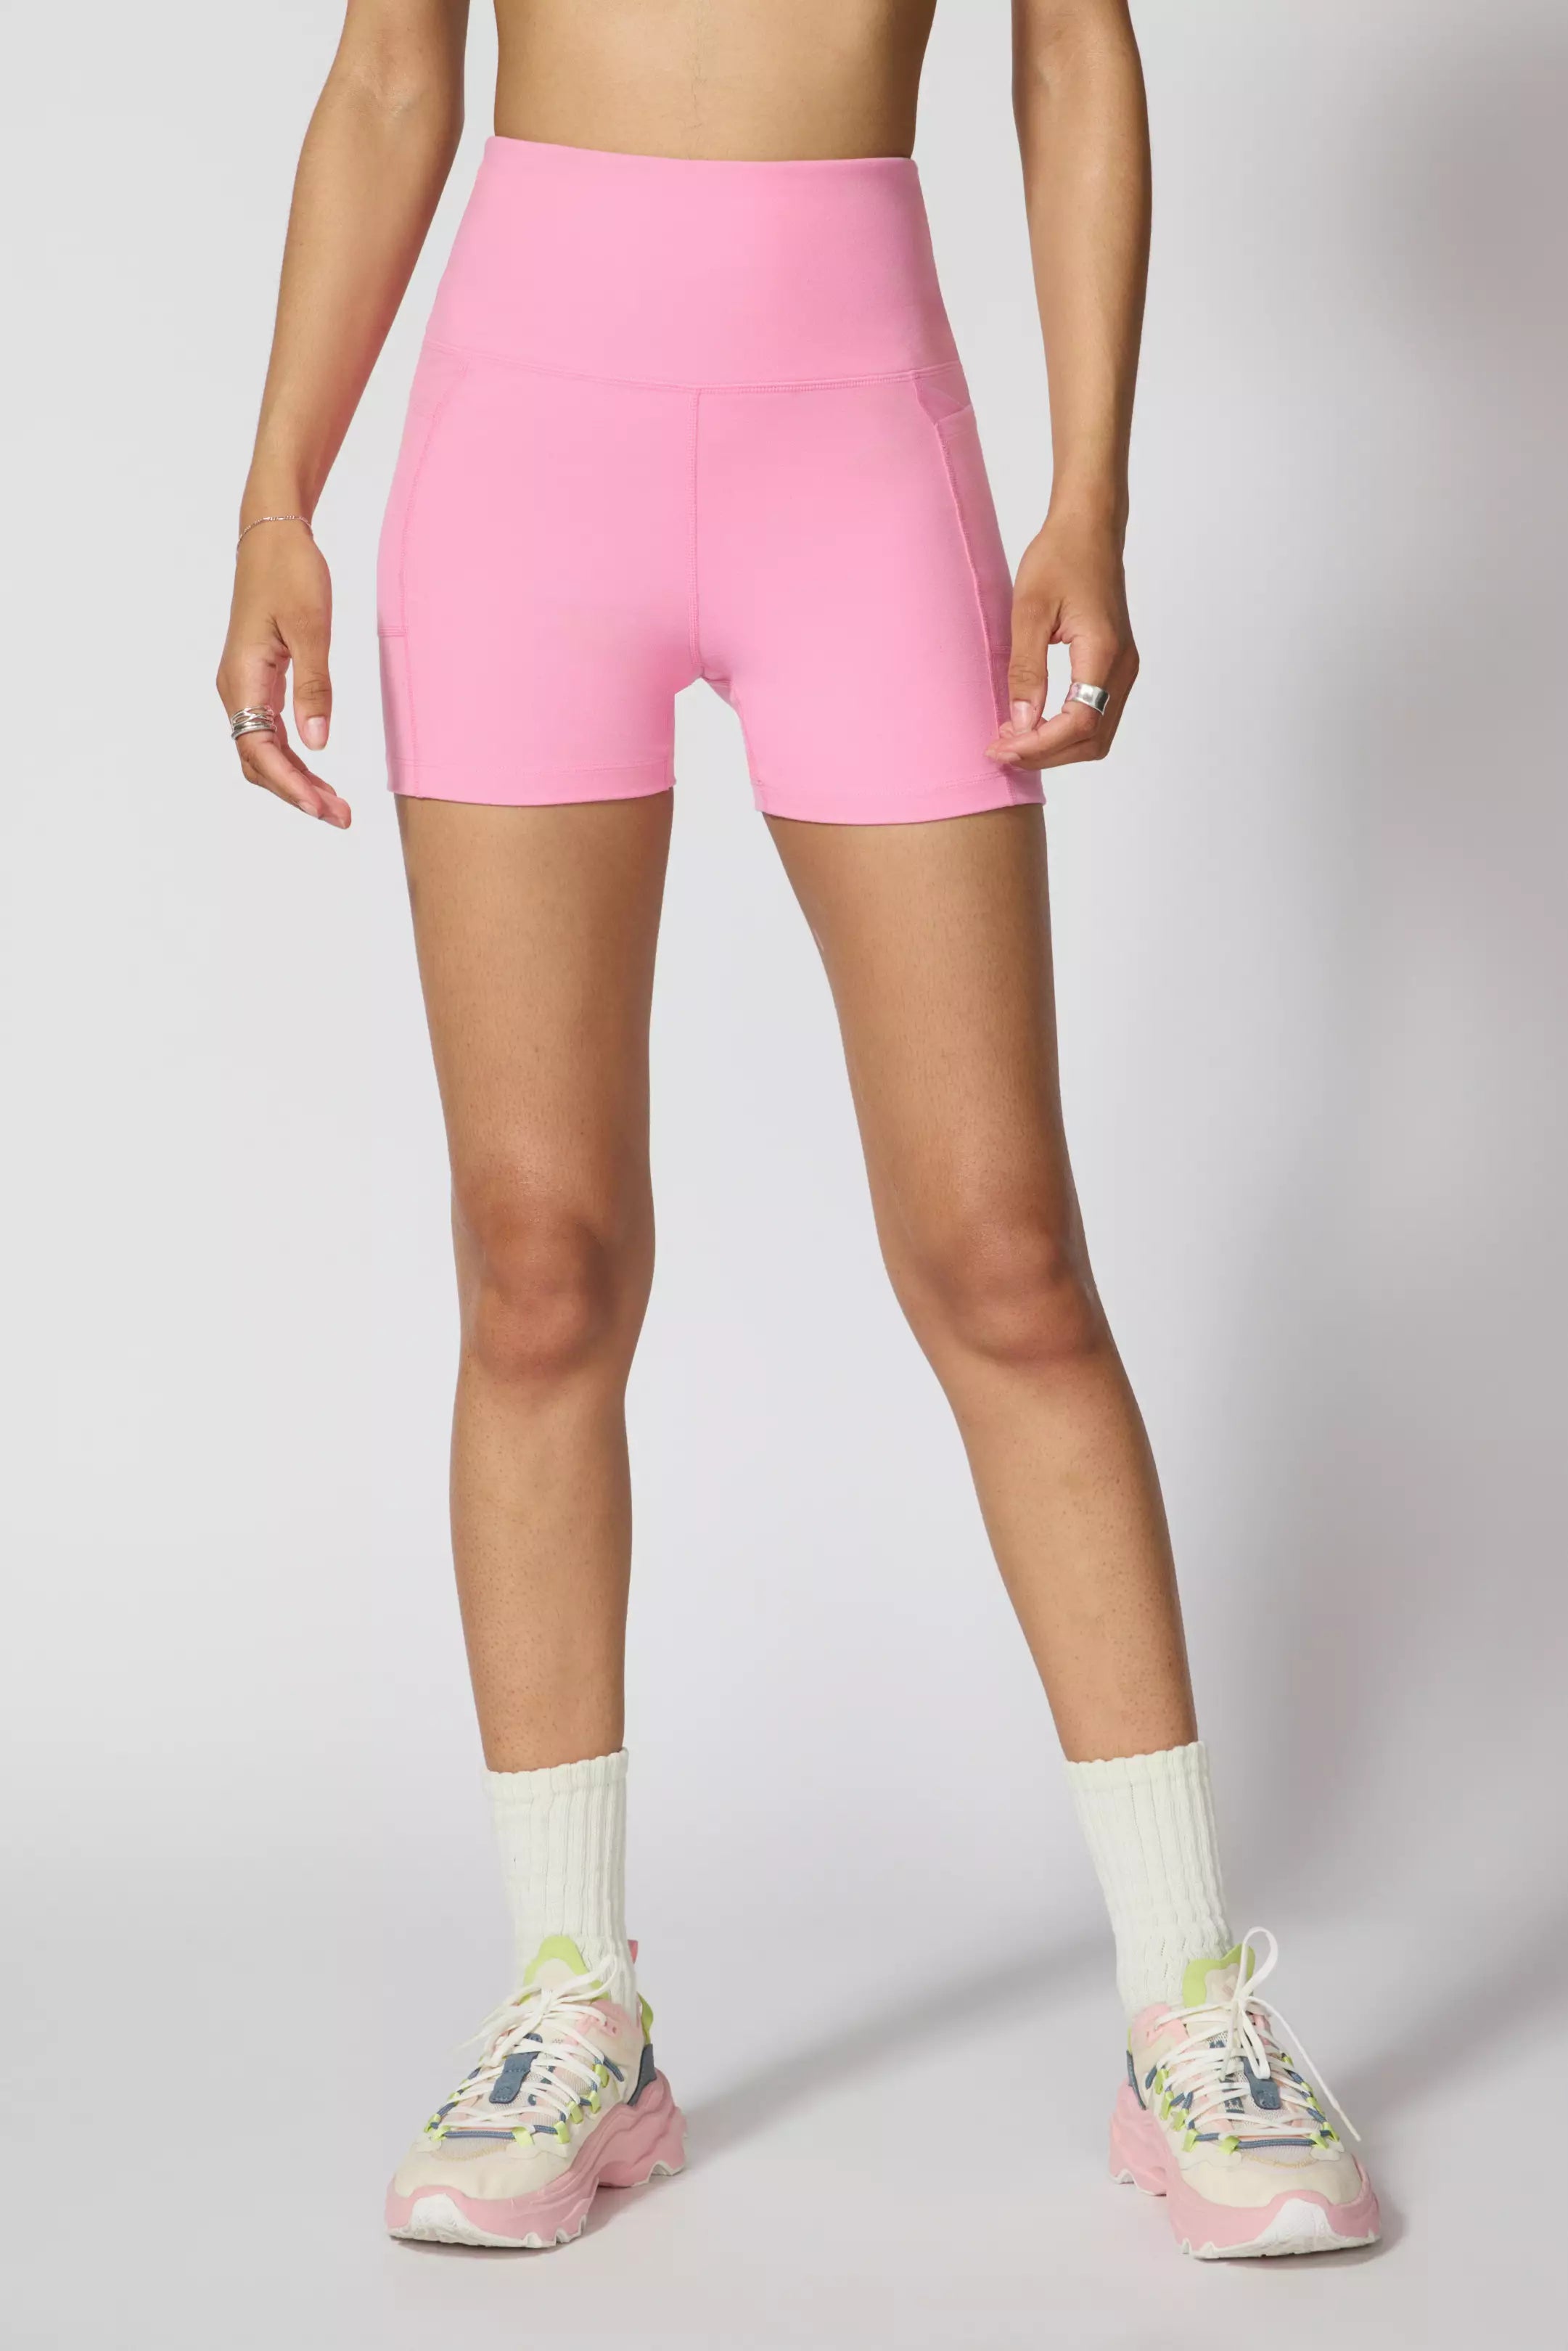 Velocity High-Waisted Side Pocket Short 4" Peached